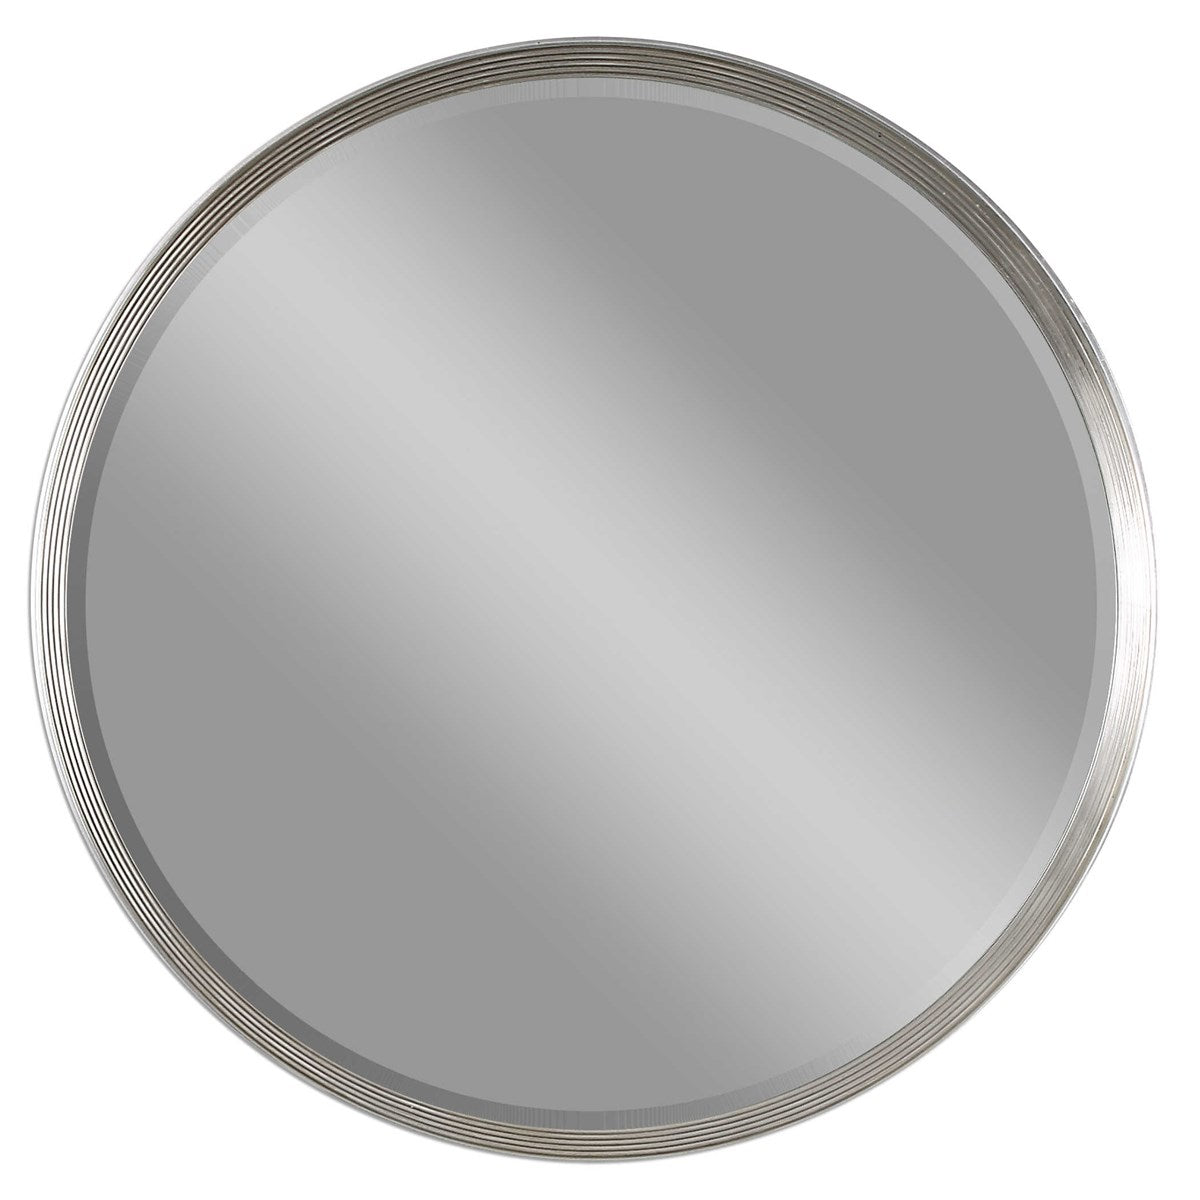 Uttermost Home Oversize - Rate to be Quoted Uttermost Serenza Round Mirror